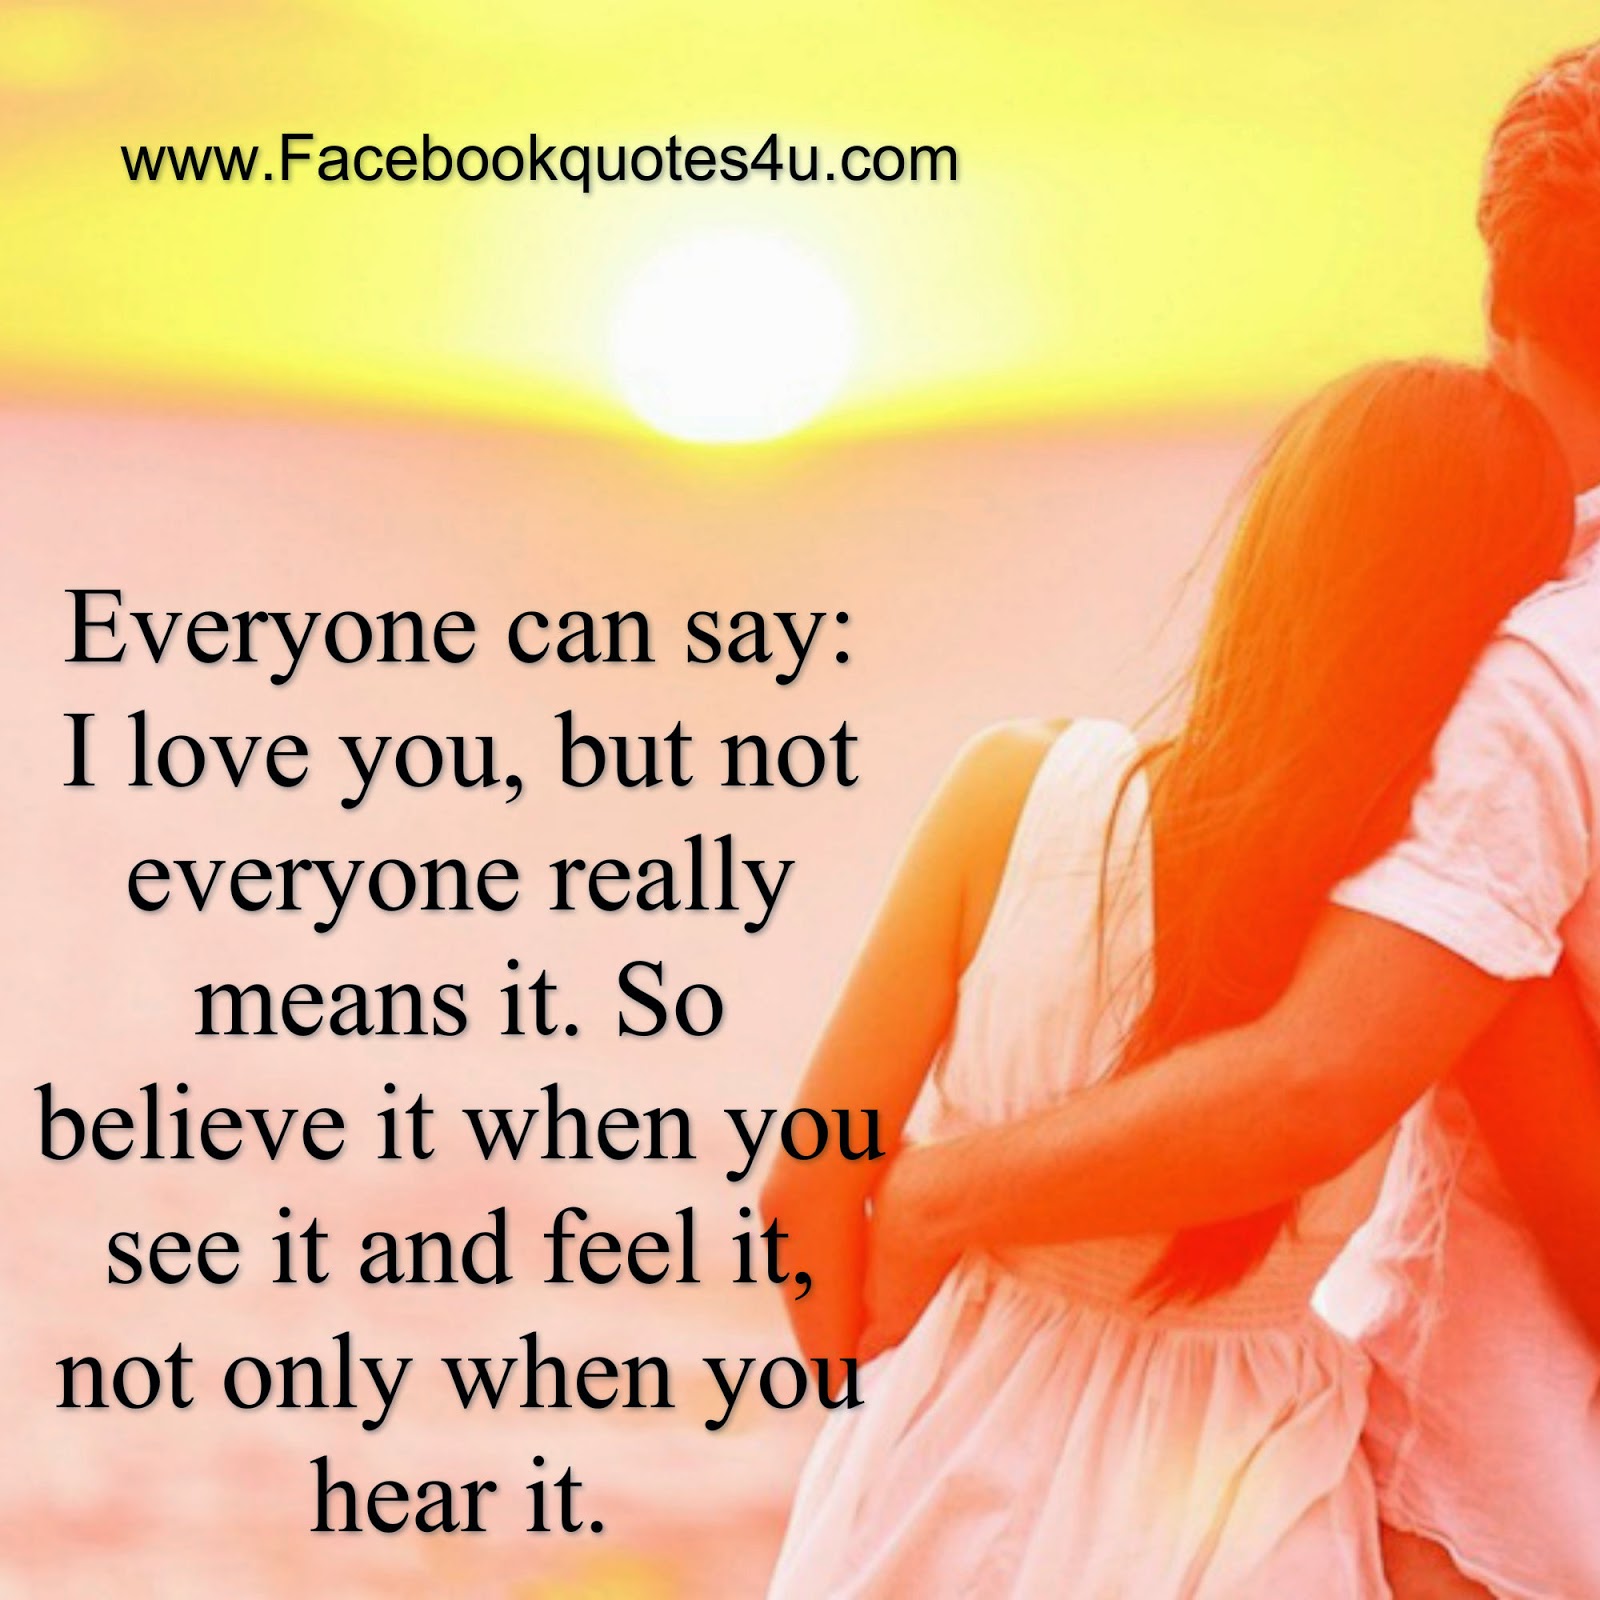 Everyone can say I Love you but not everyone really means it